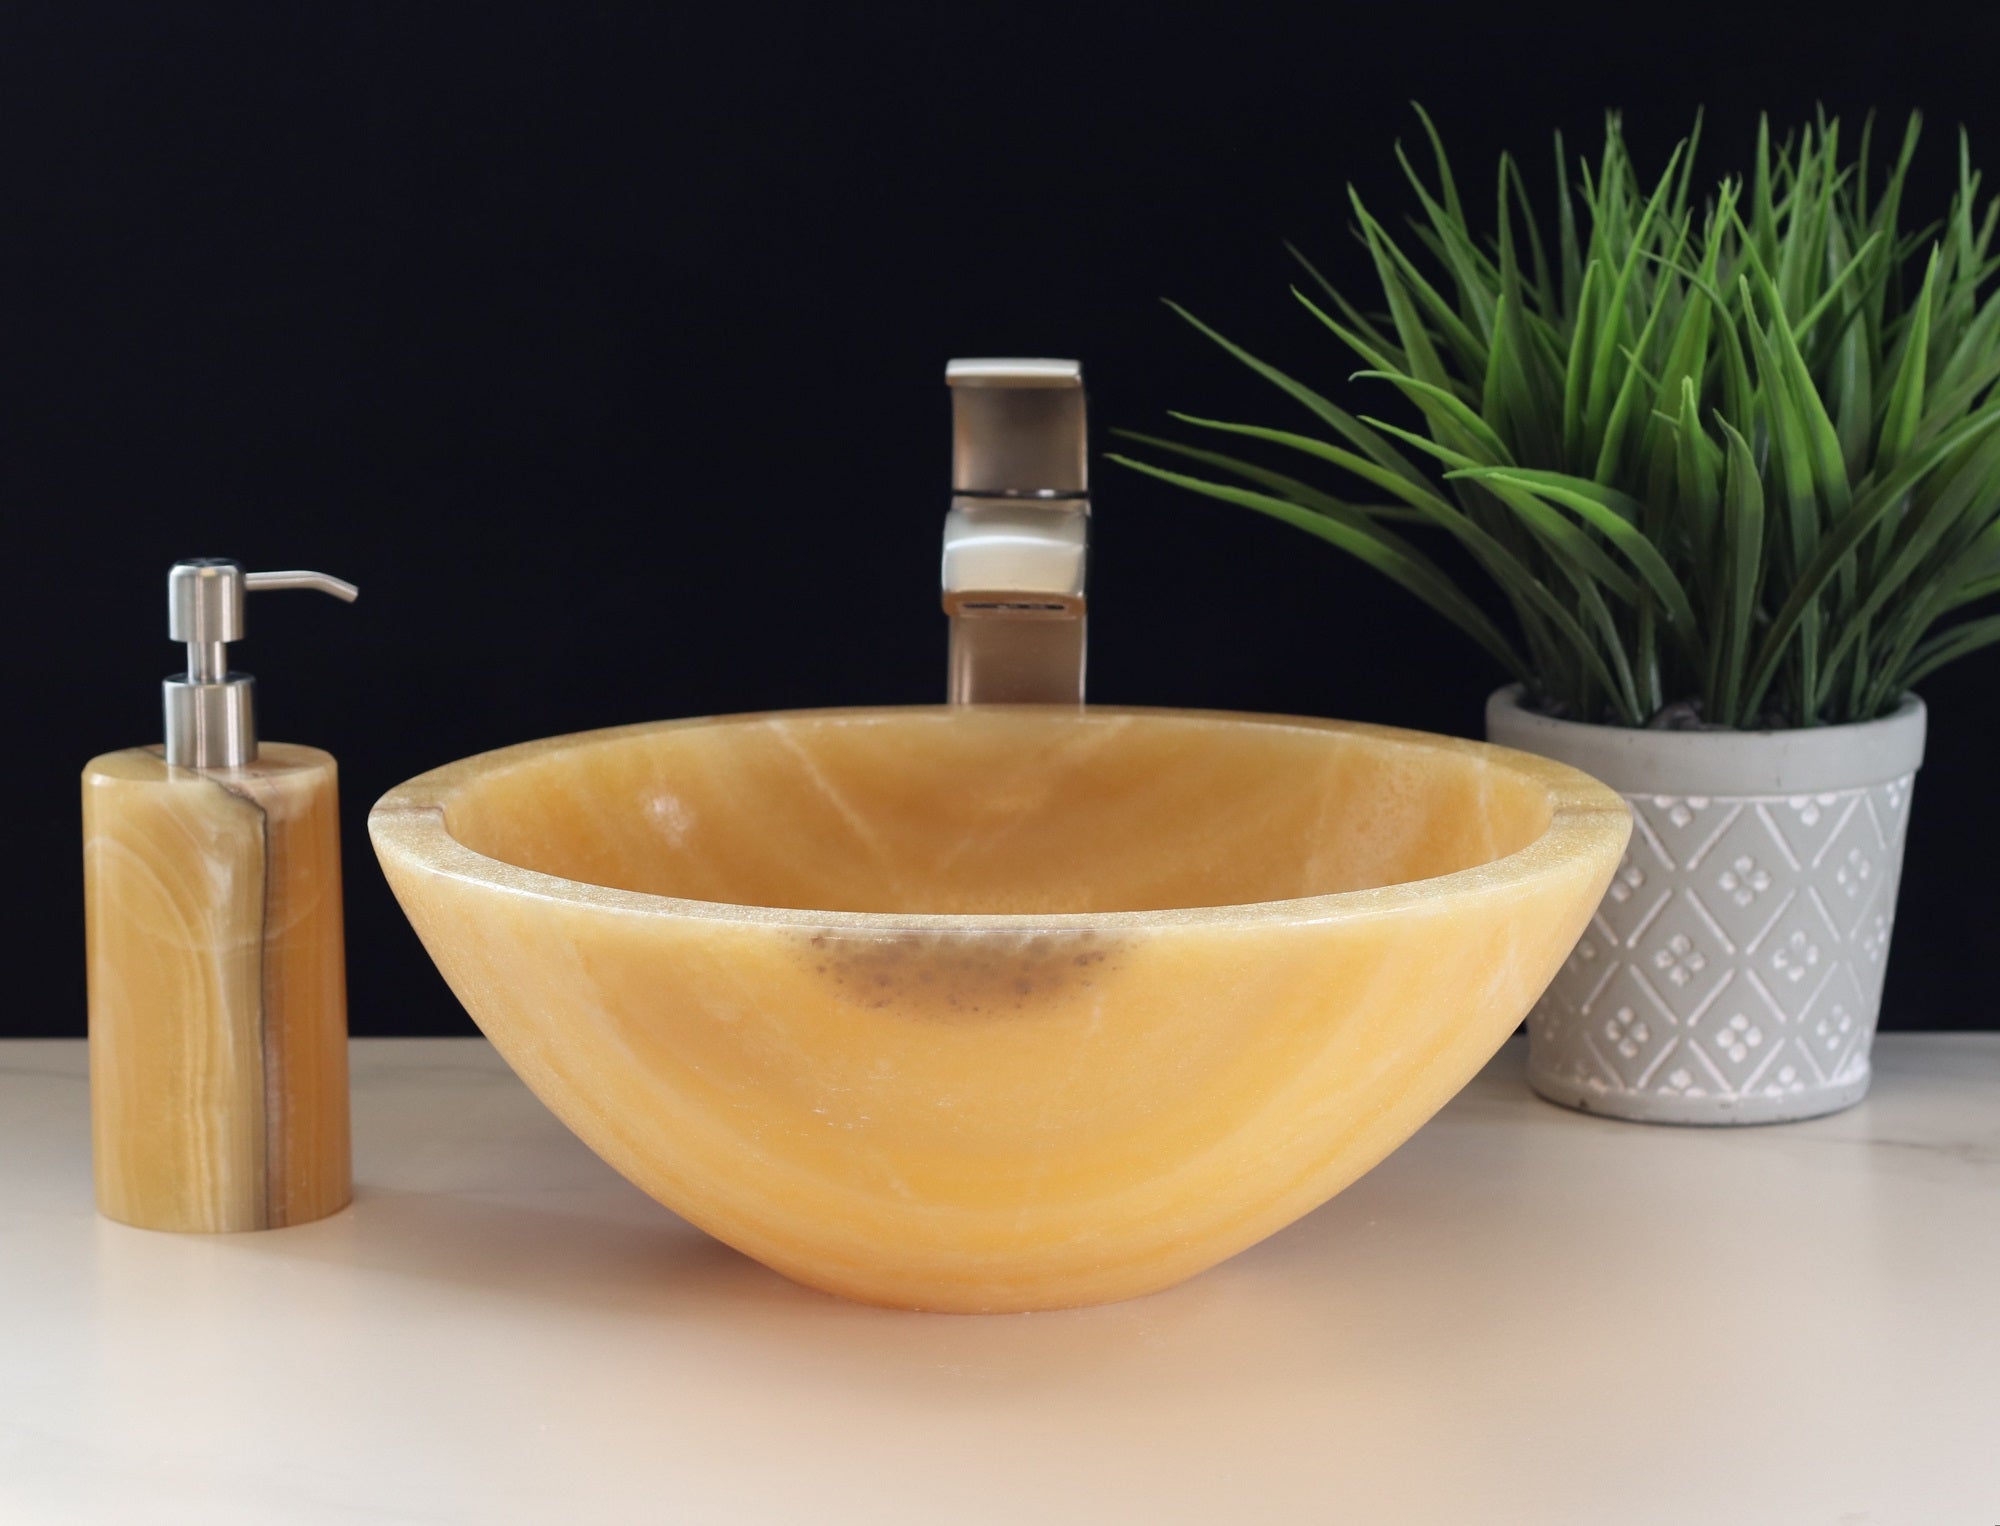 Beige and Orange Round Onyx Stone Bathroom Vessel Sink. A beautiful work of art. We offer fast shipping. Handmade in Mexico. We hand finish, package, and ship from the USA. Buy now at www.felipeandgrace.com. 